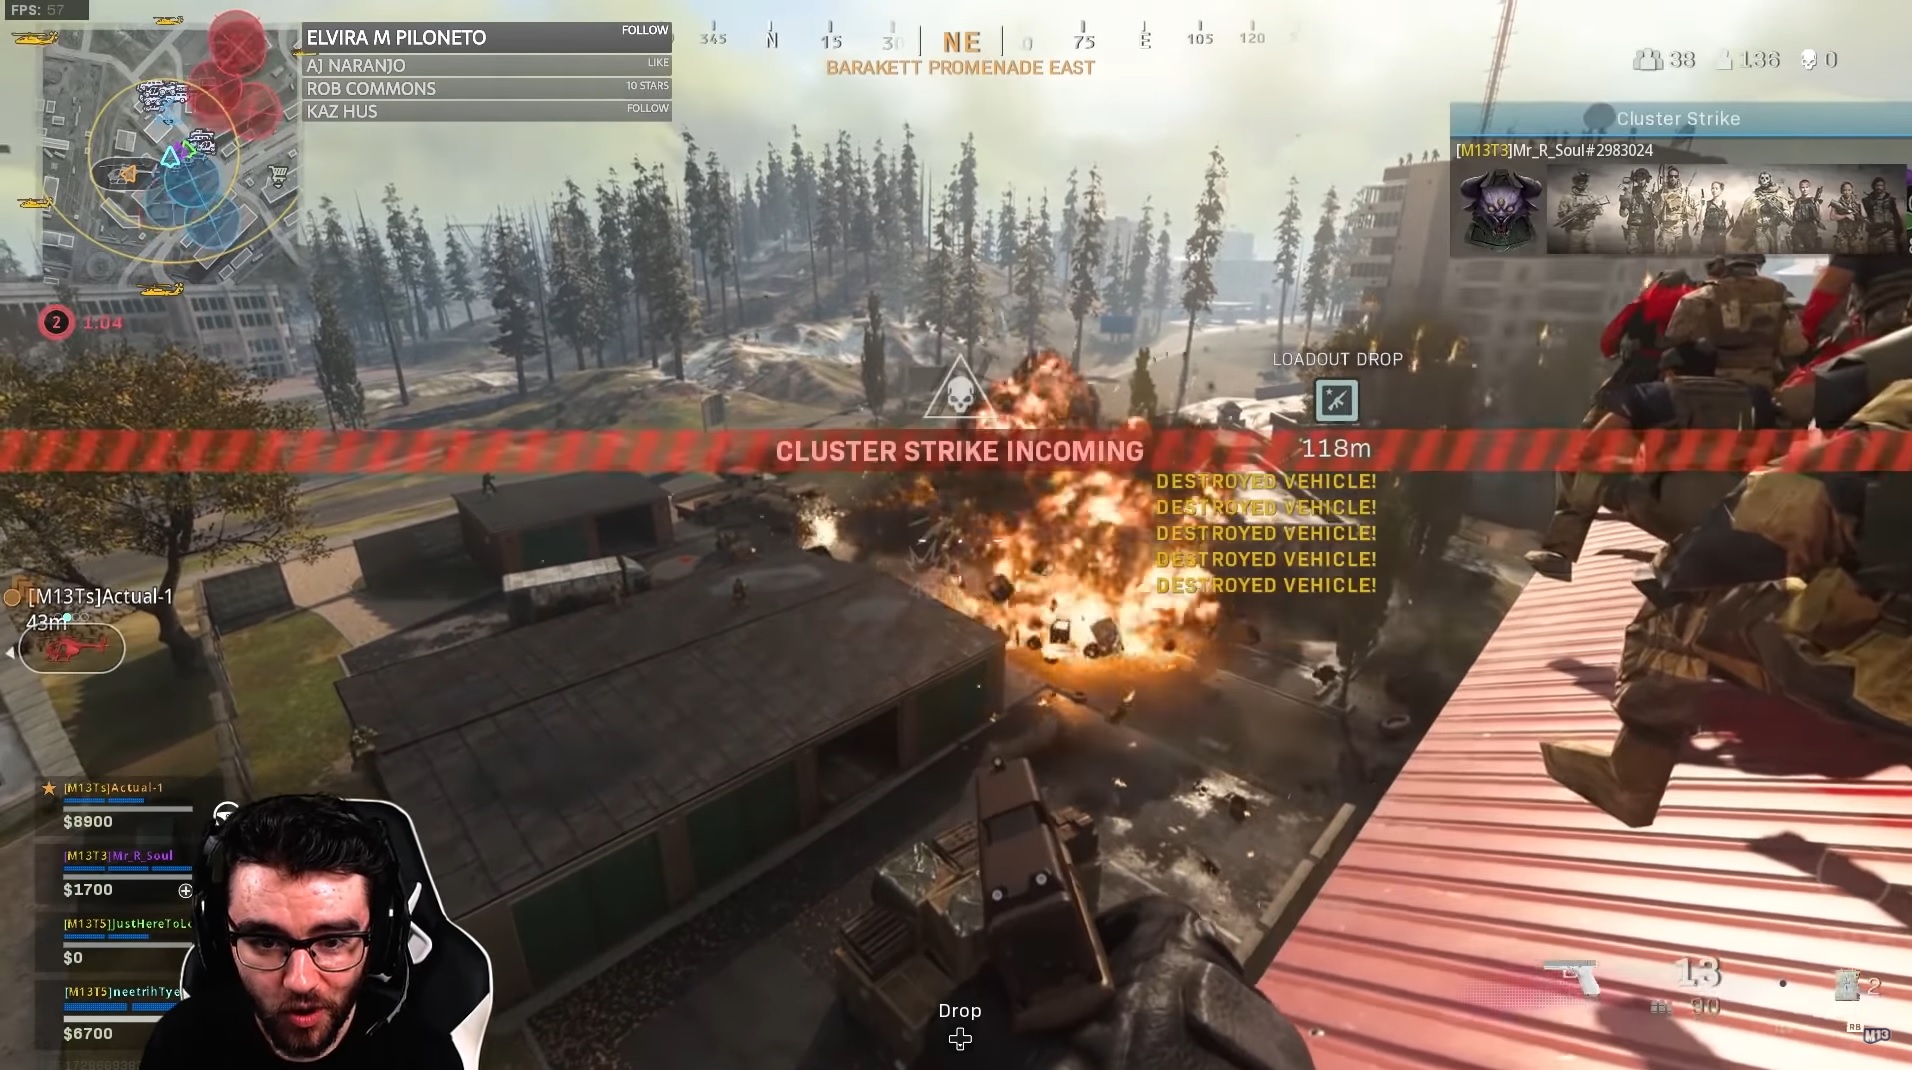 The Streamer crashes the Warzone server by blowing up all vehicles simultaneously